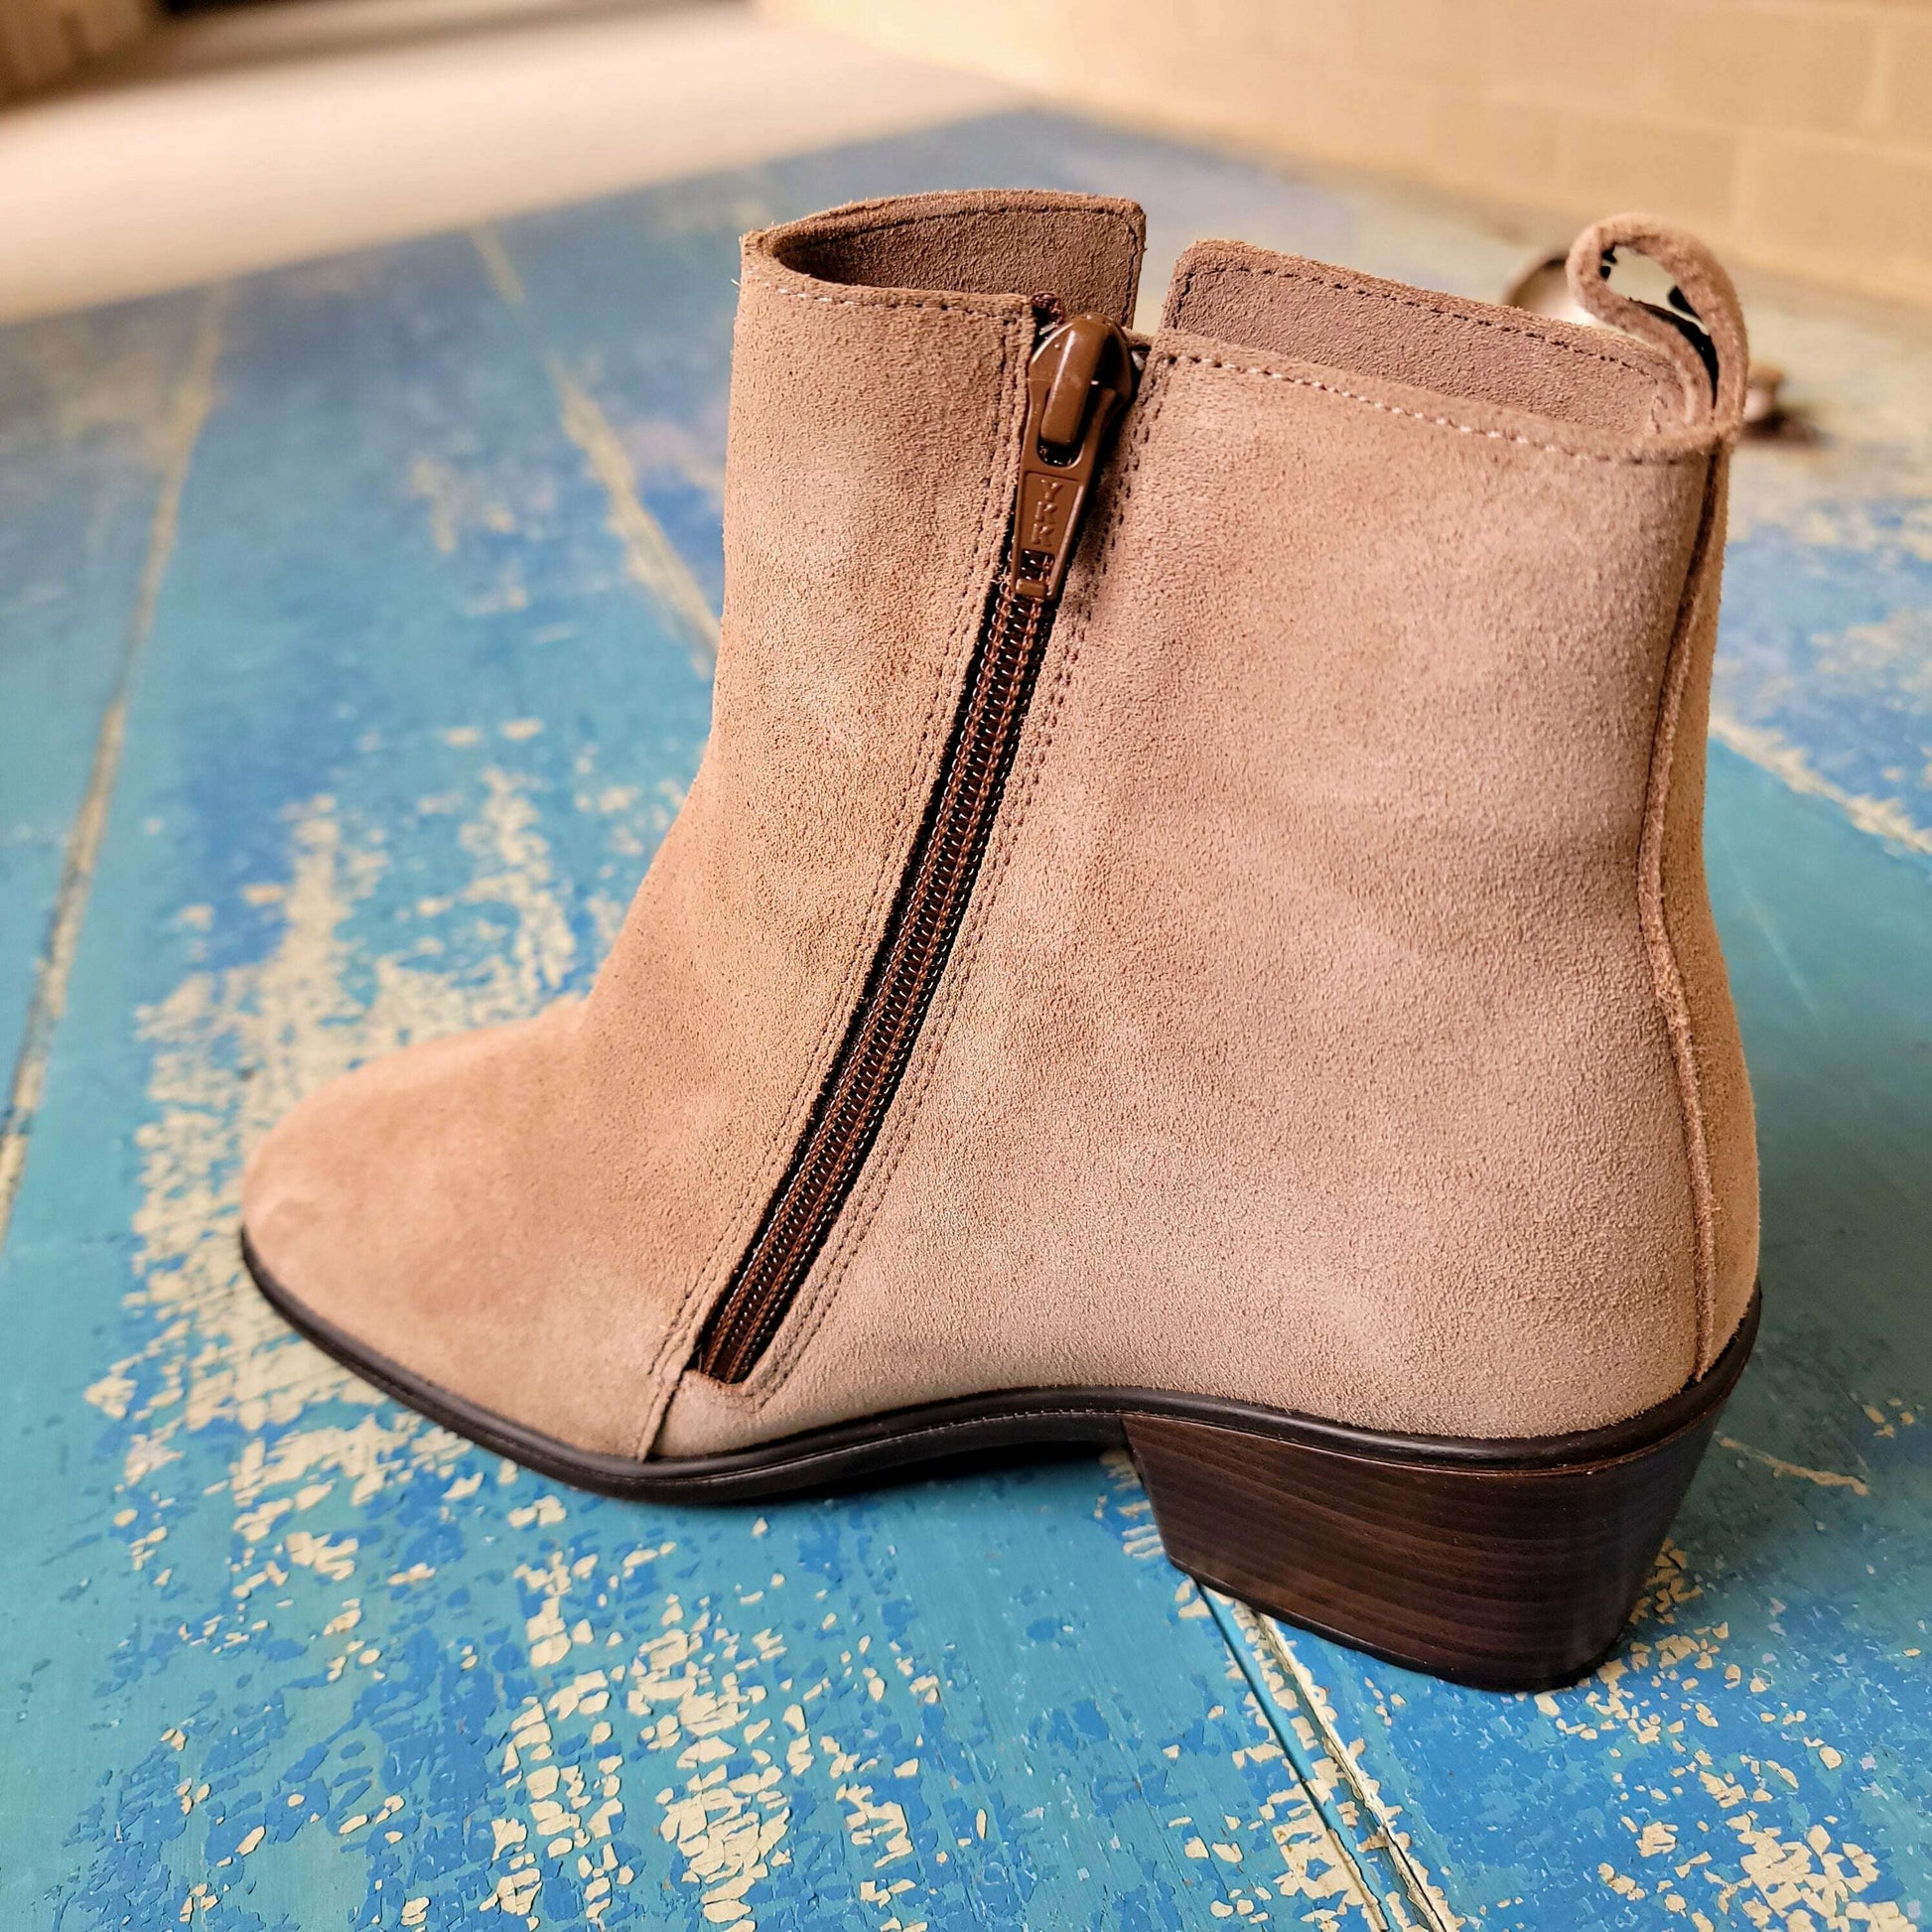 Naot - ETHIC - Almond Suede, Boots, Yaleet, Plum Bottom